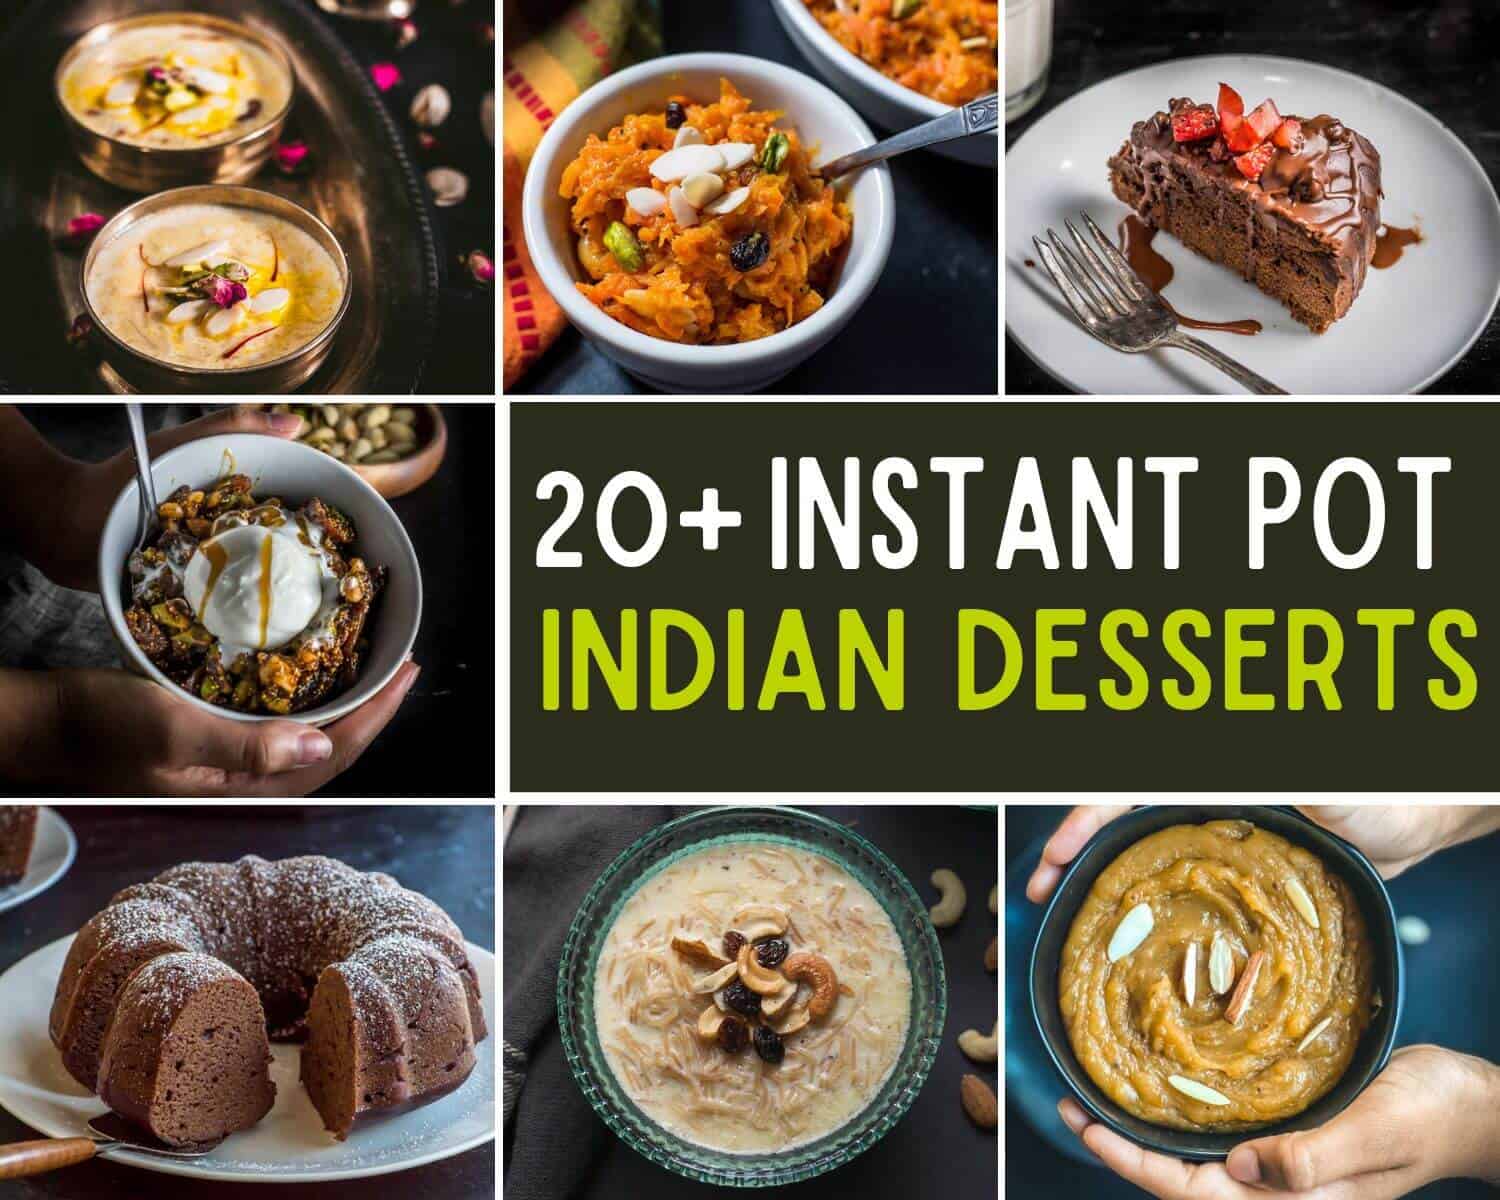 A collage of 7 images with caption 20+ Instant Pot Indian Desserts